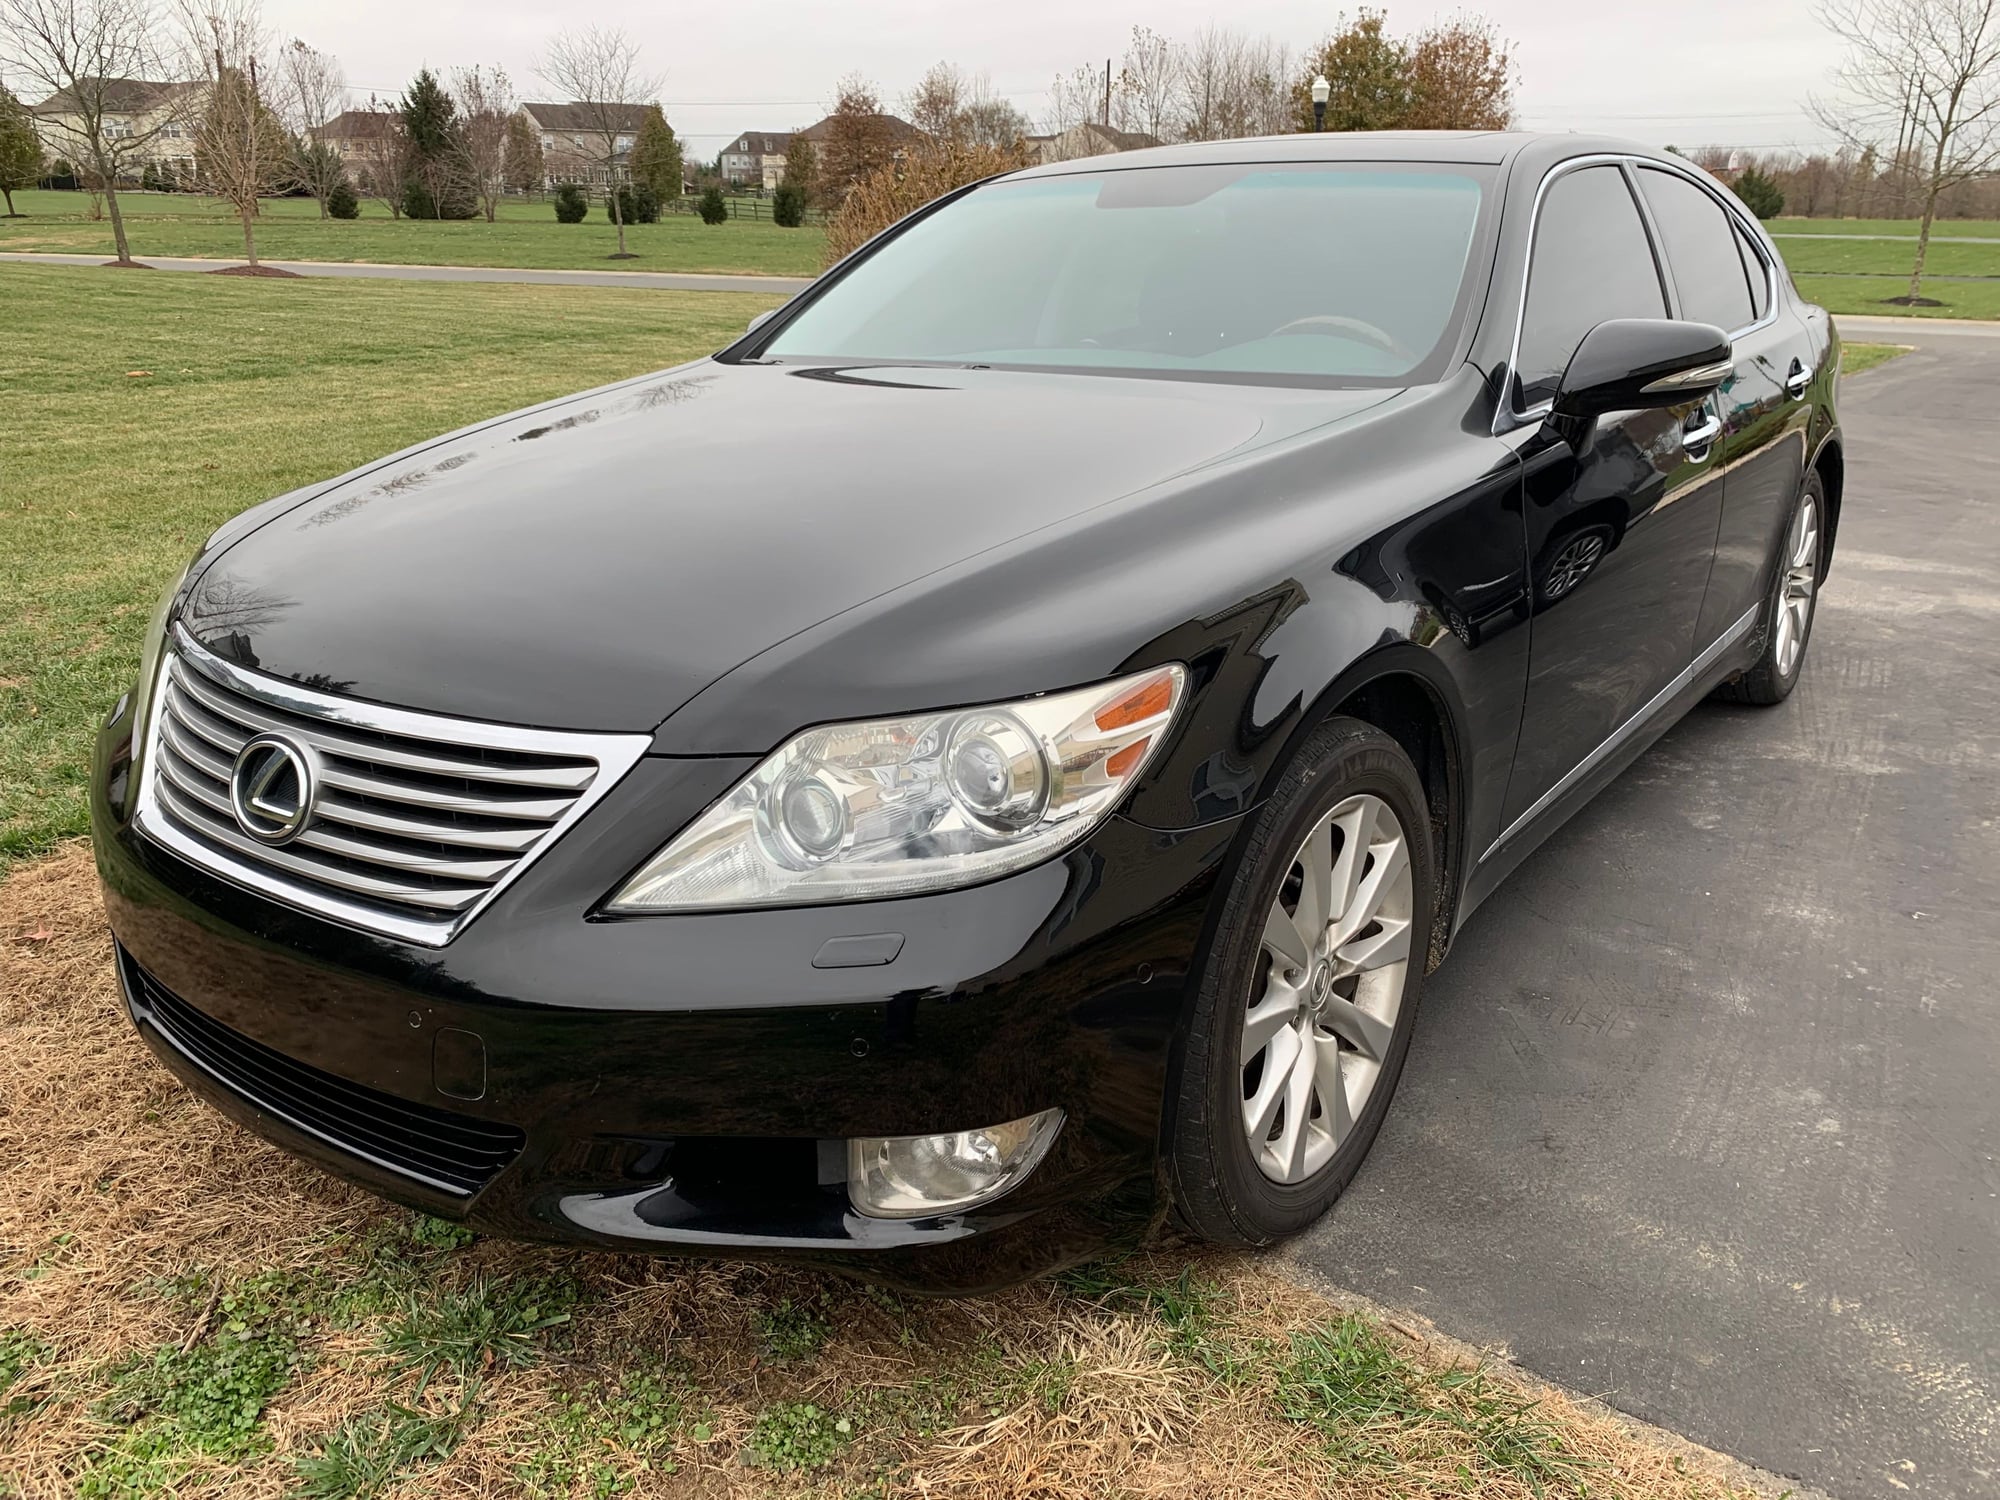 2011 Lexus LS460 - Delaware -Ls460 2011 AWD black on black good condition, very well maintained. - Used - VIN JTHCL5EF2B5010127 - 122,000 Miles - 8 cyl - AWD - Automatic - Sedan - Black - Newark, DE 19702, United States